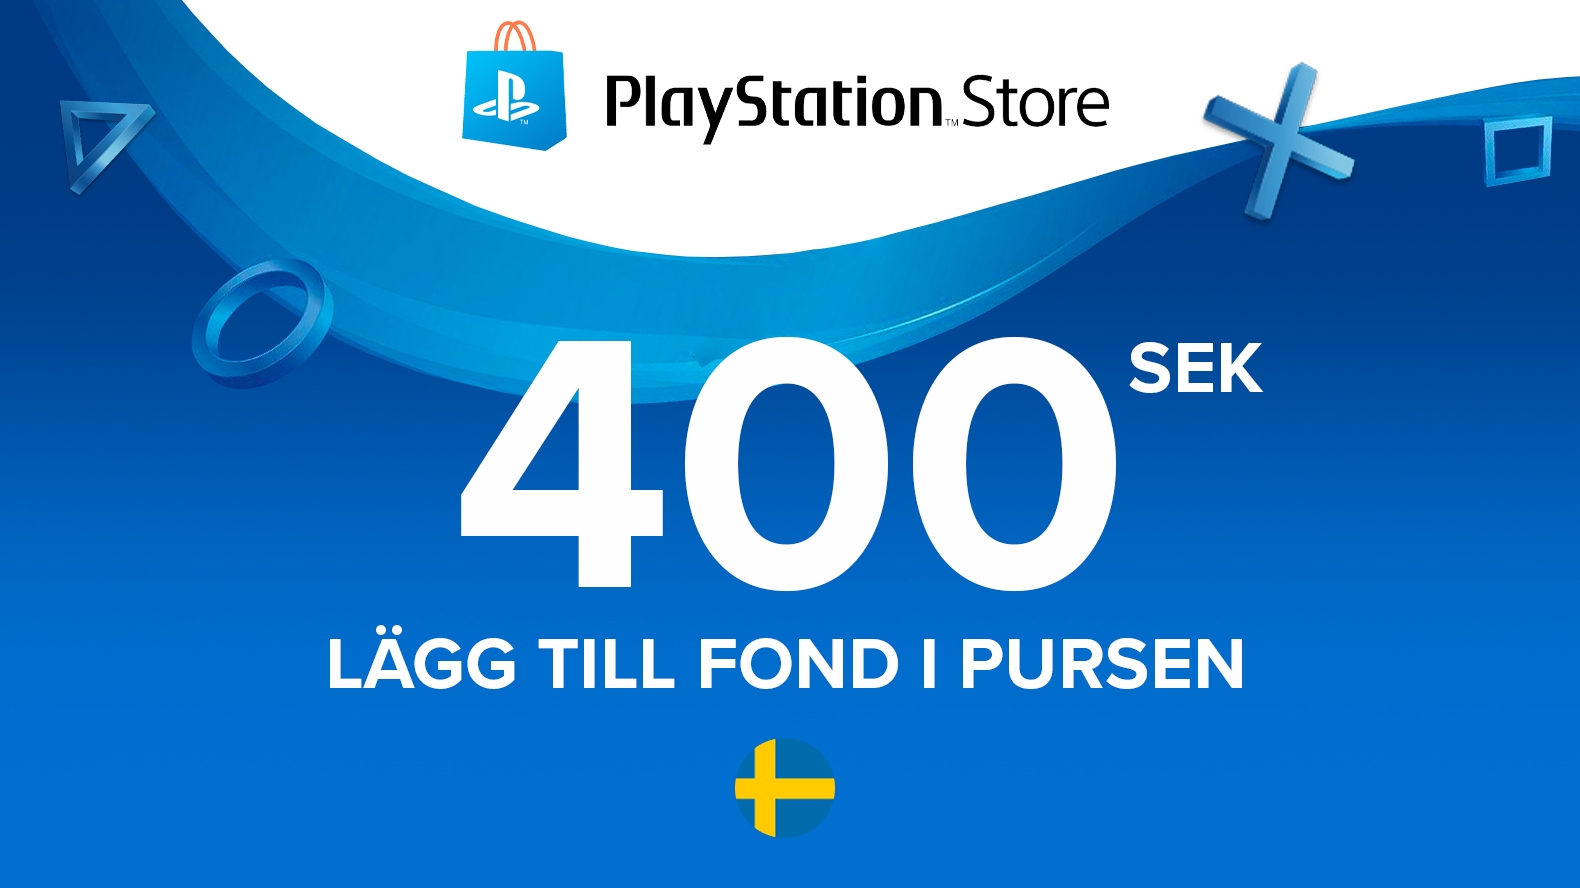 buy gift playstation store